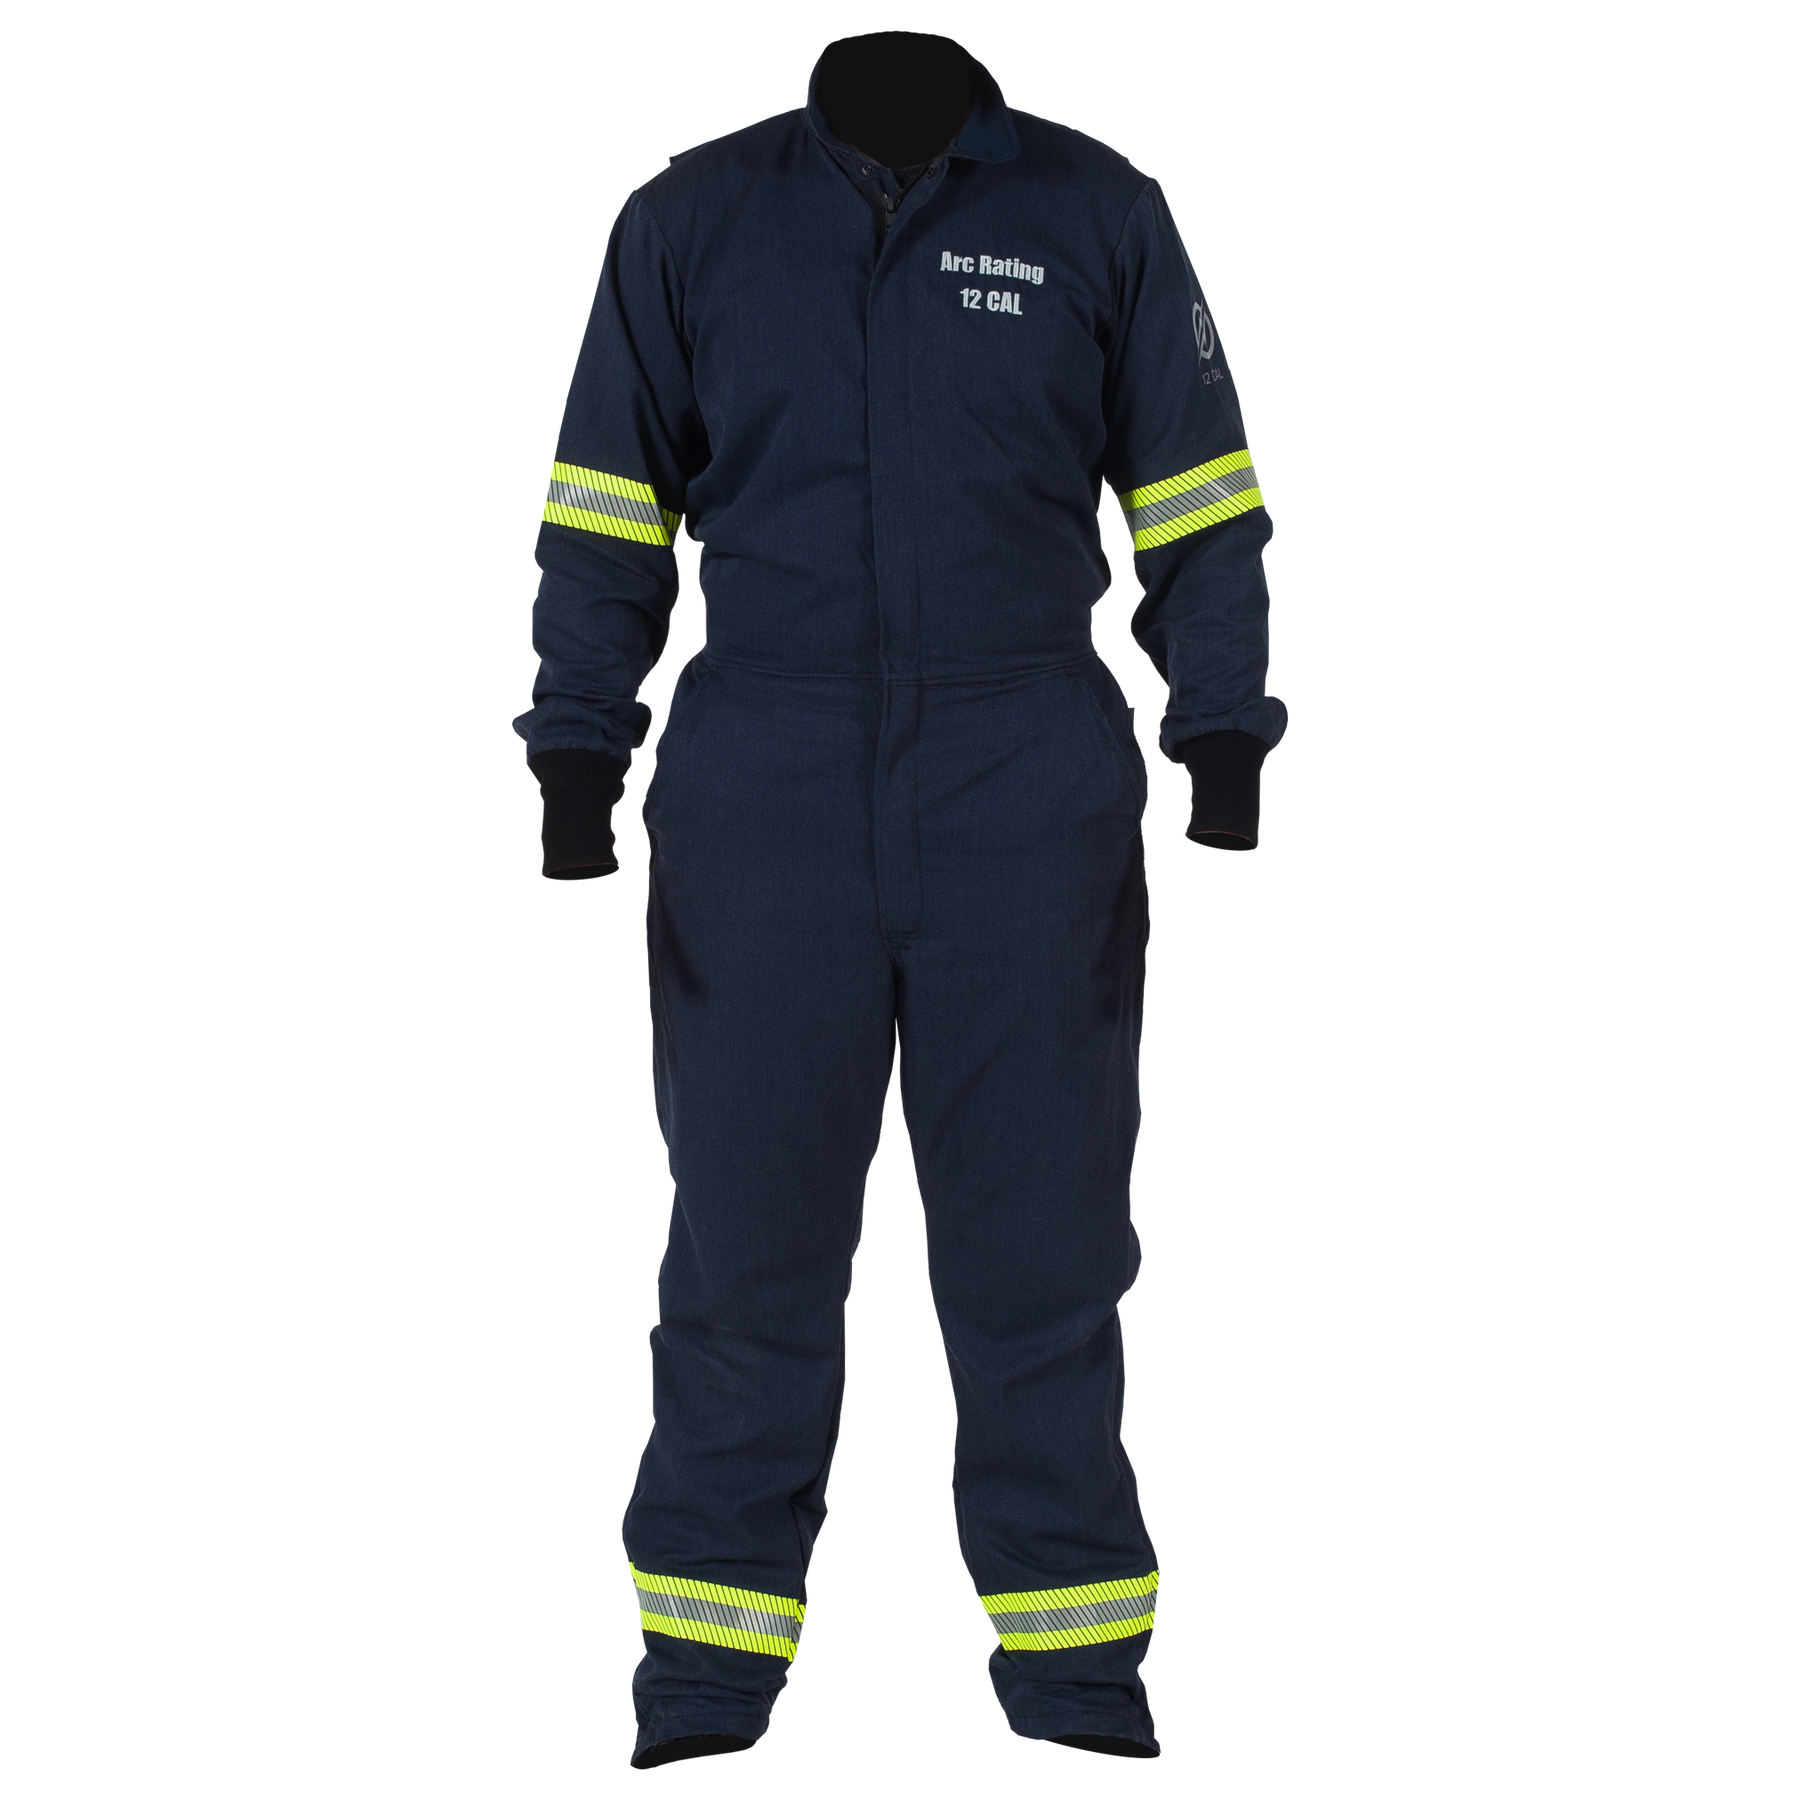 Enespro AirLite 12 cal Arc Flash Coverall